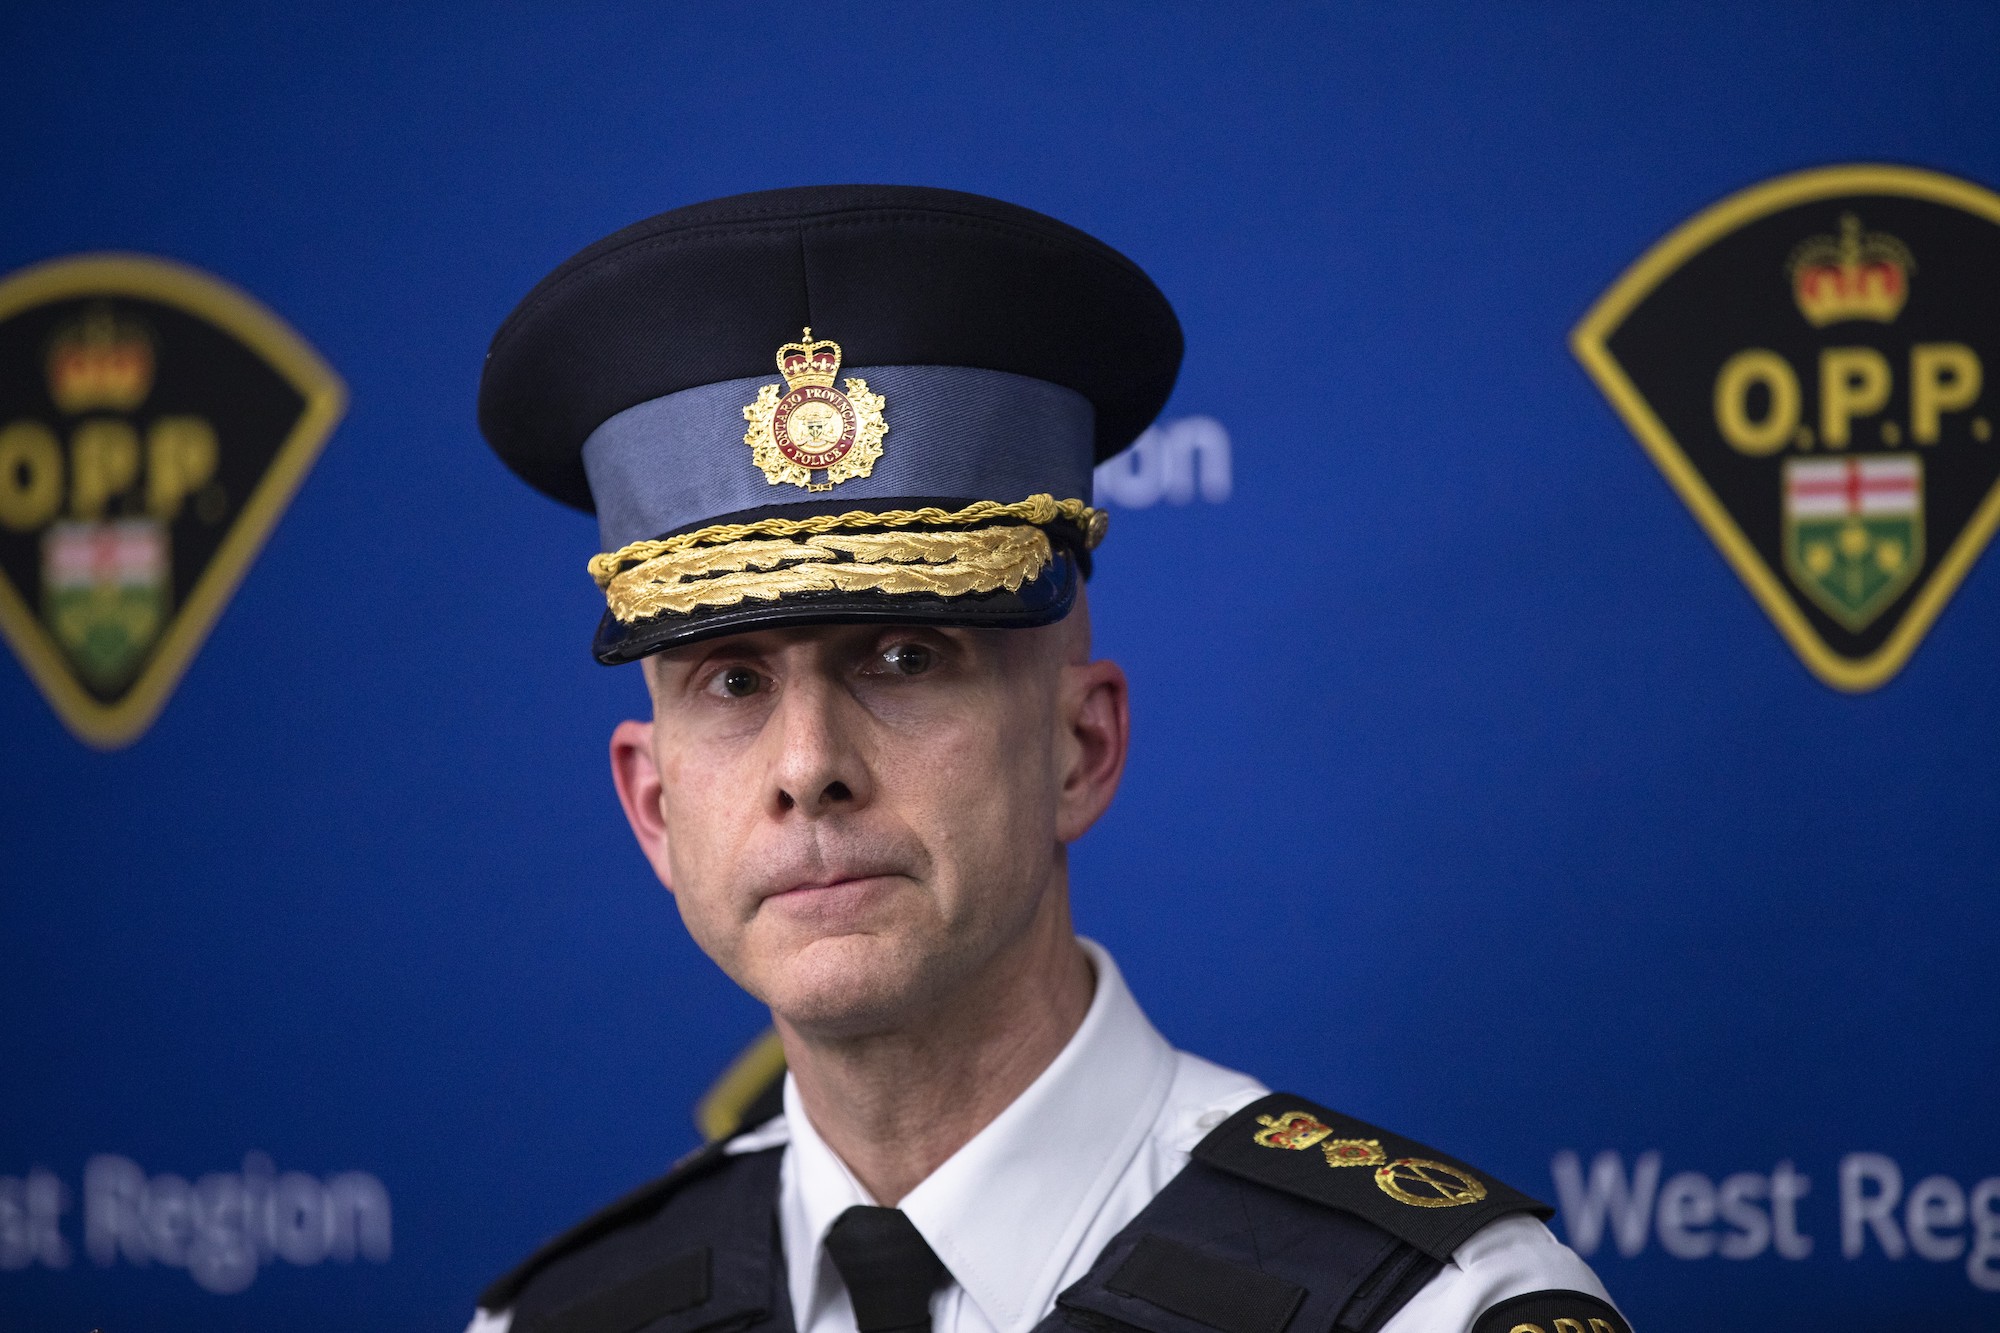 Premier vows at OPP officer's funeral to 'do whatever it takes' to protect police